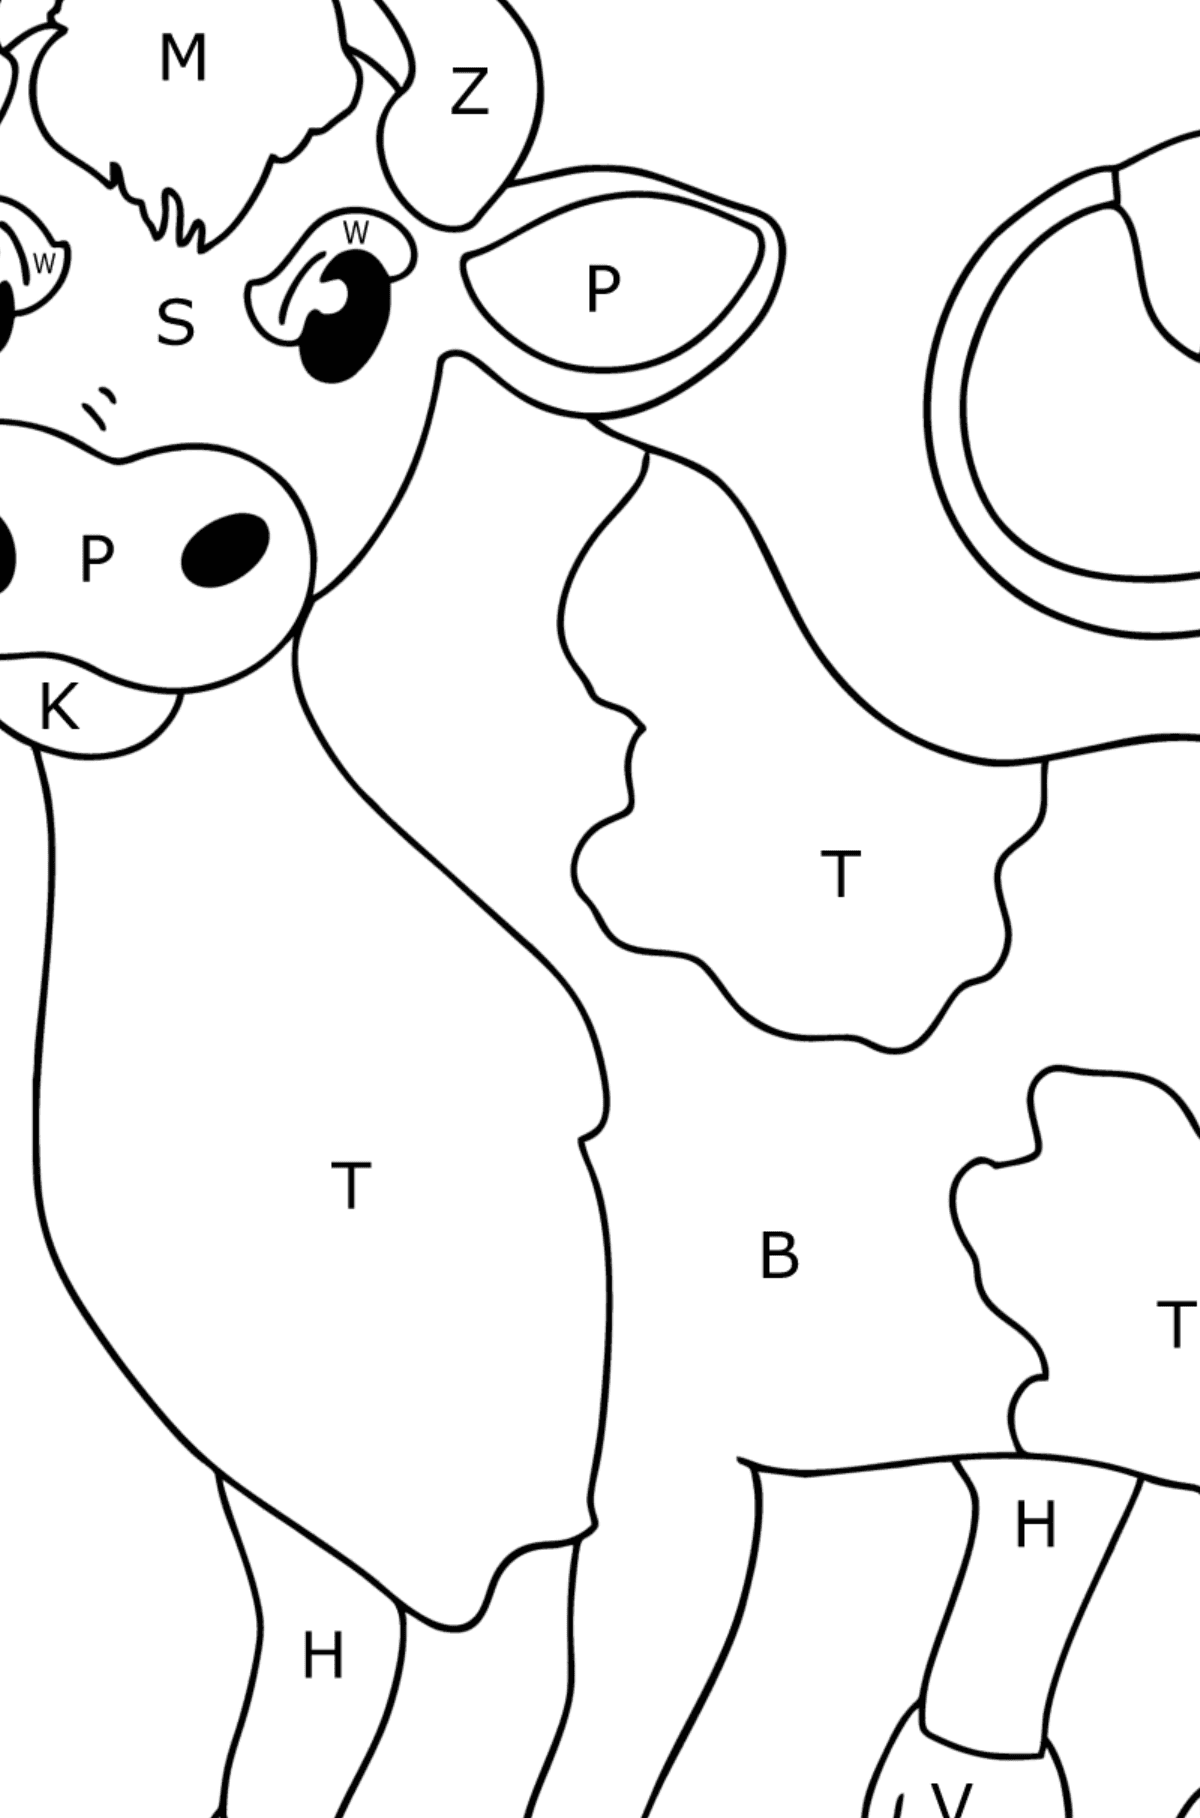 Gray bull coloring page - Coloring by Letters for Kids